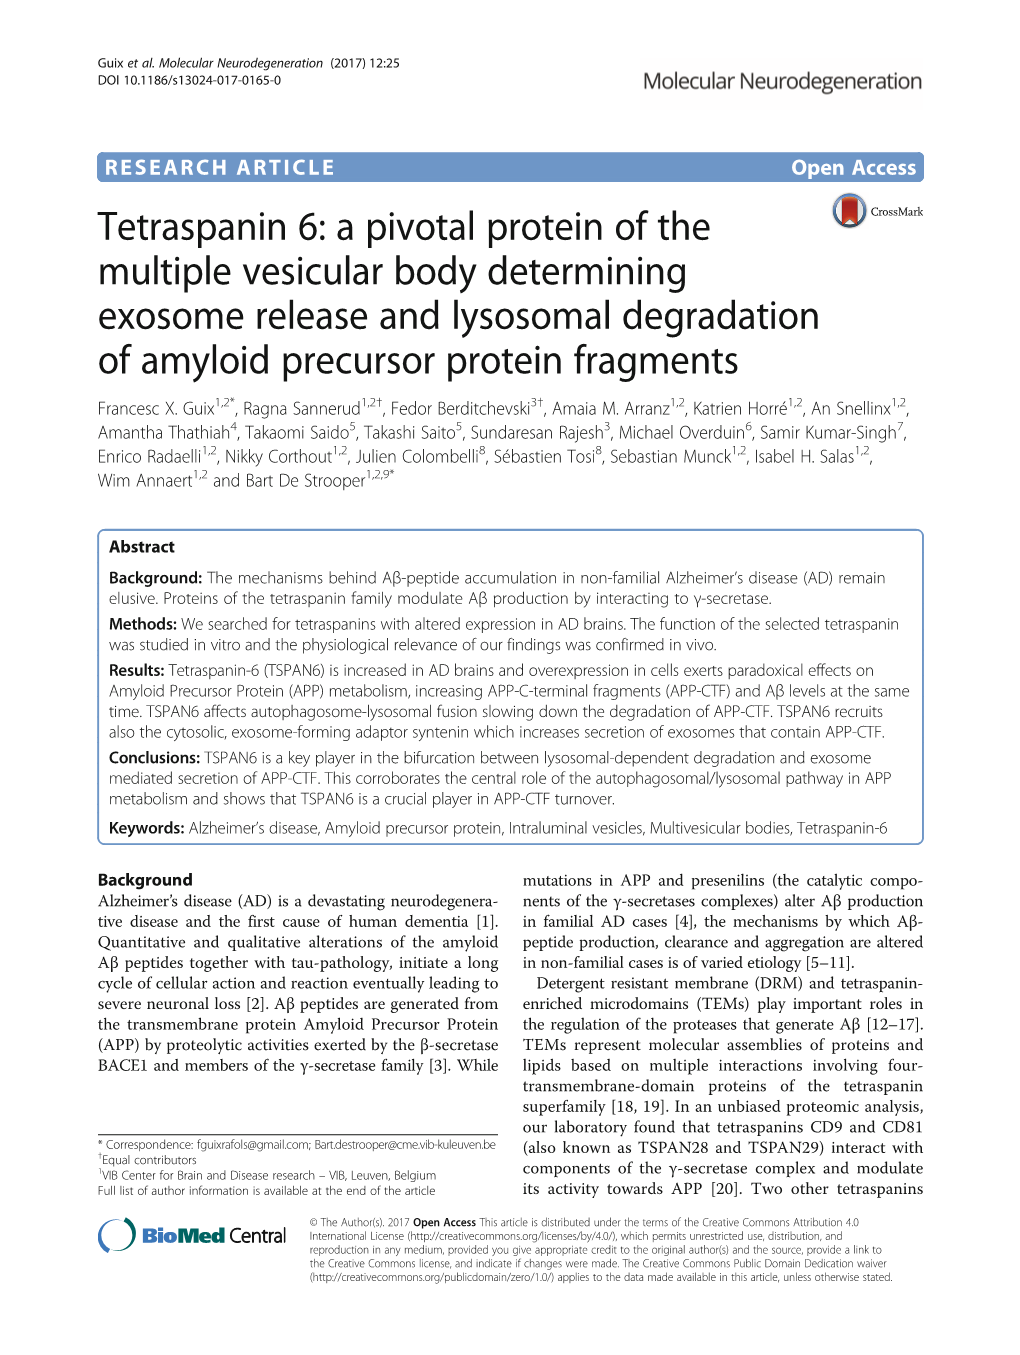 A Pivotal Protein of the Multiple Vesicular Body Determining Exosome Release and Lysosomal Degradation of Amyloid Precursor Protein Fragments Francesc X